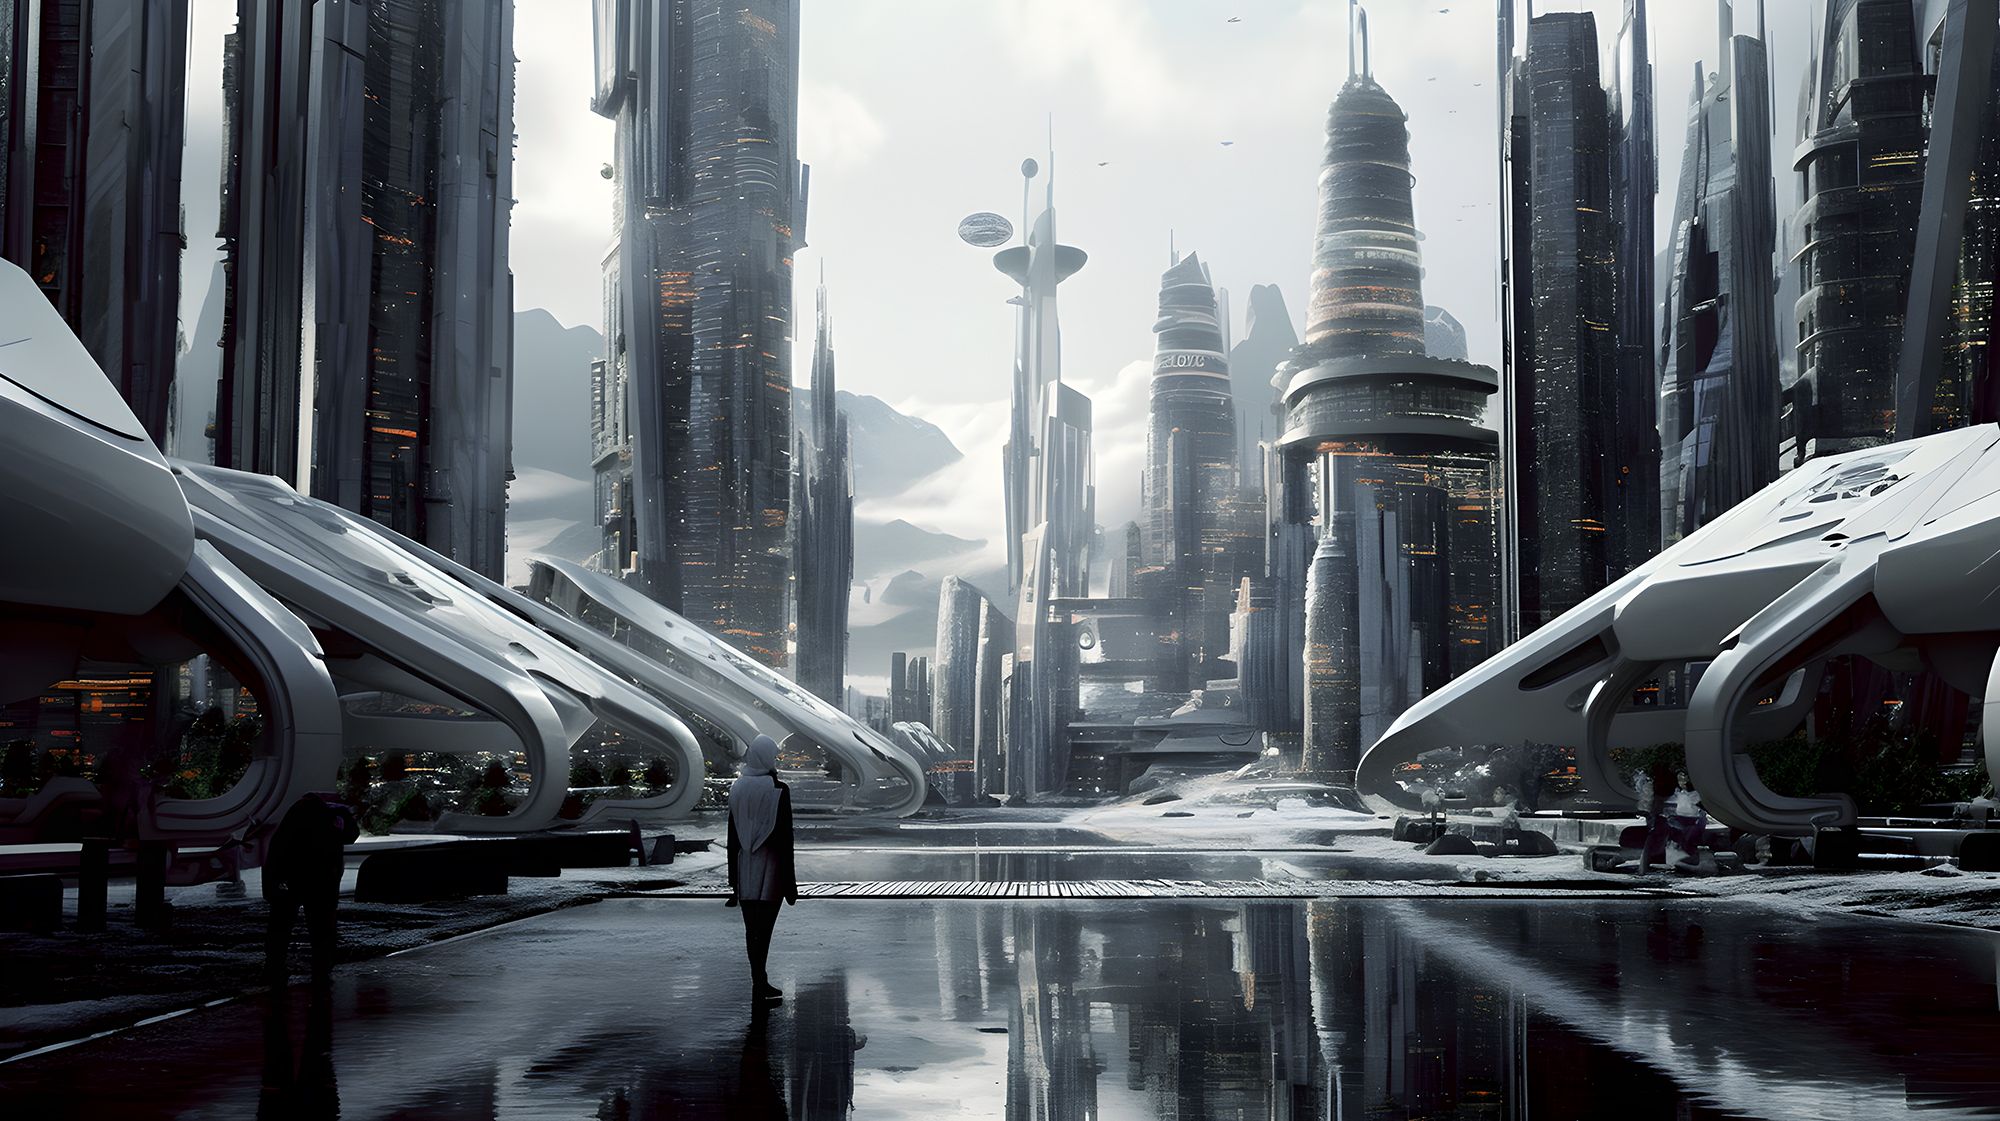 A futuristic city with tall buildings.